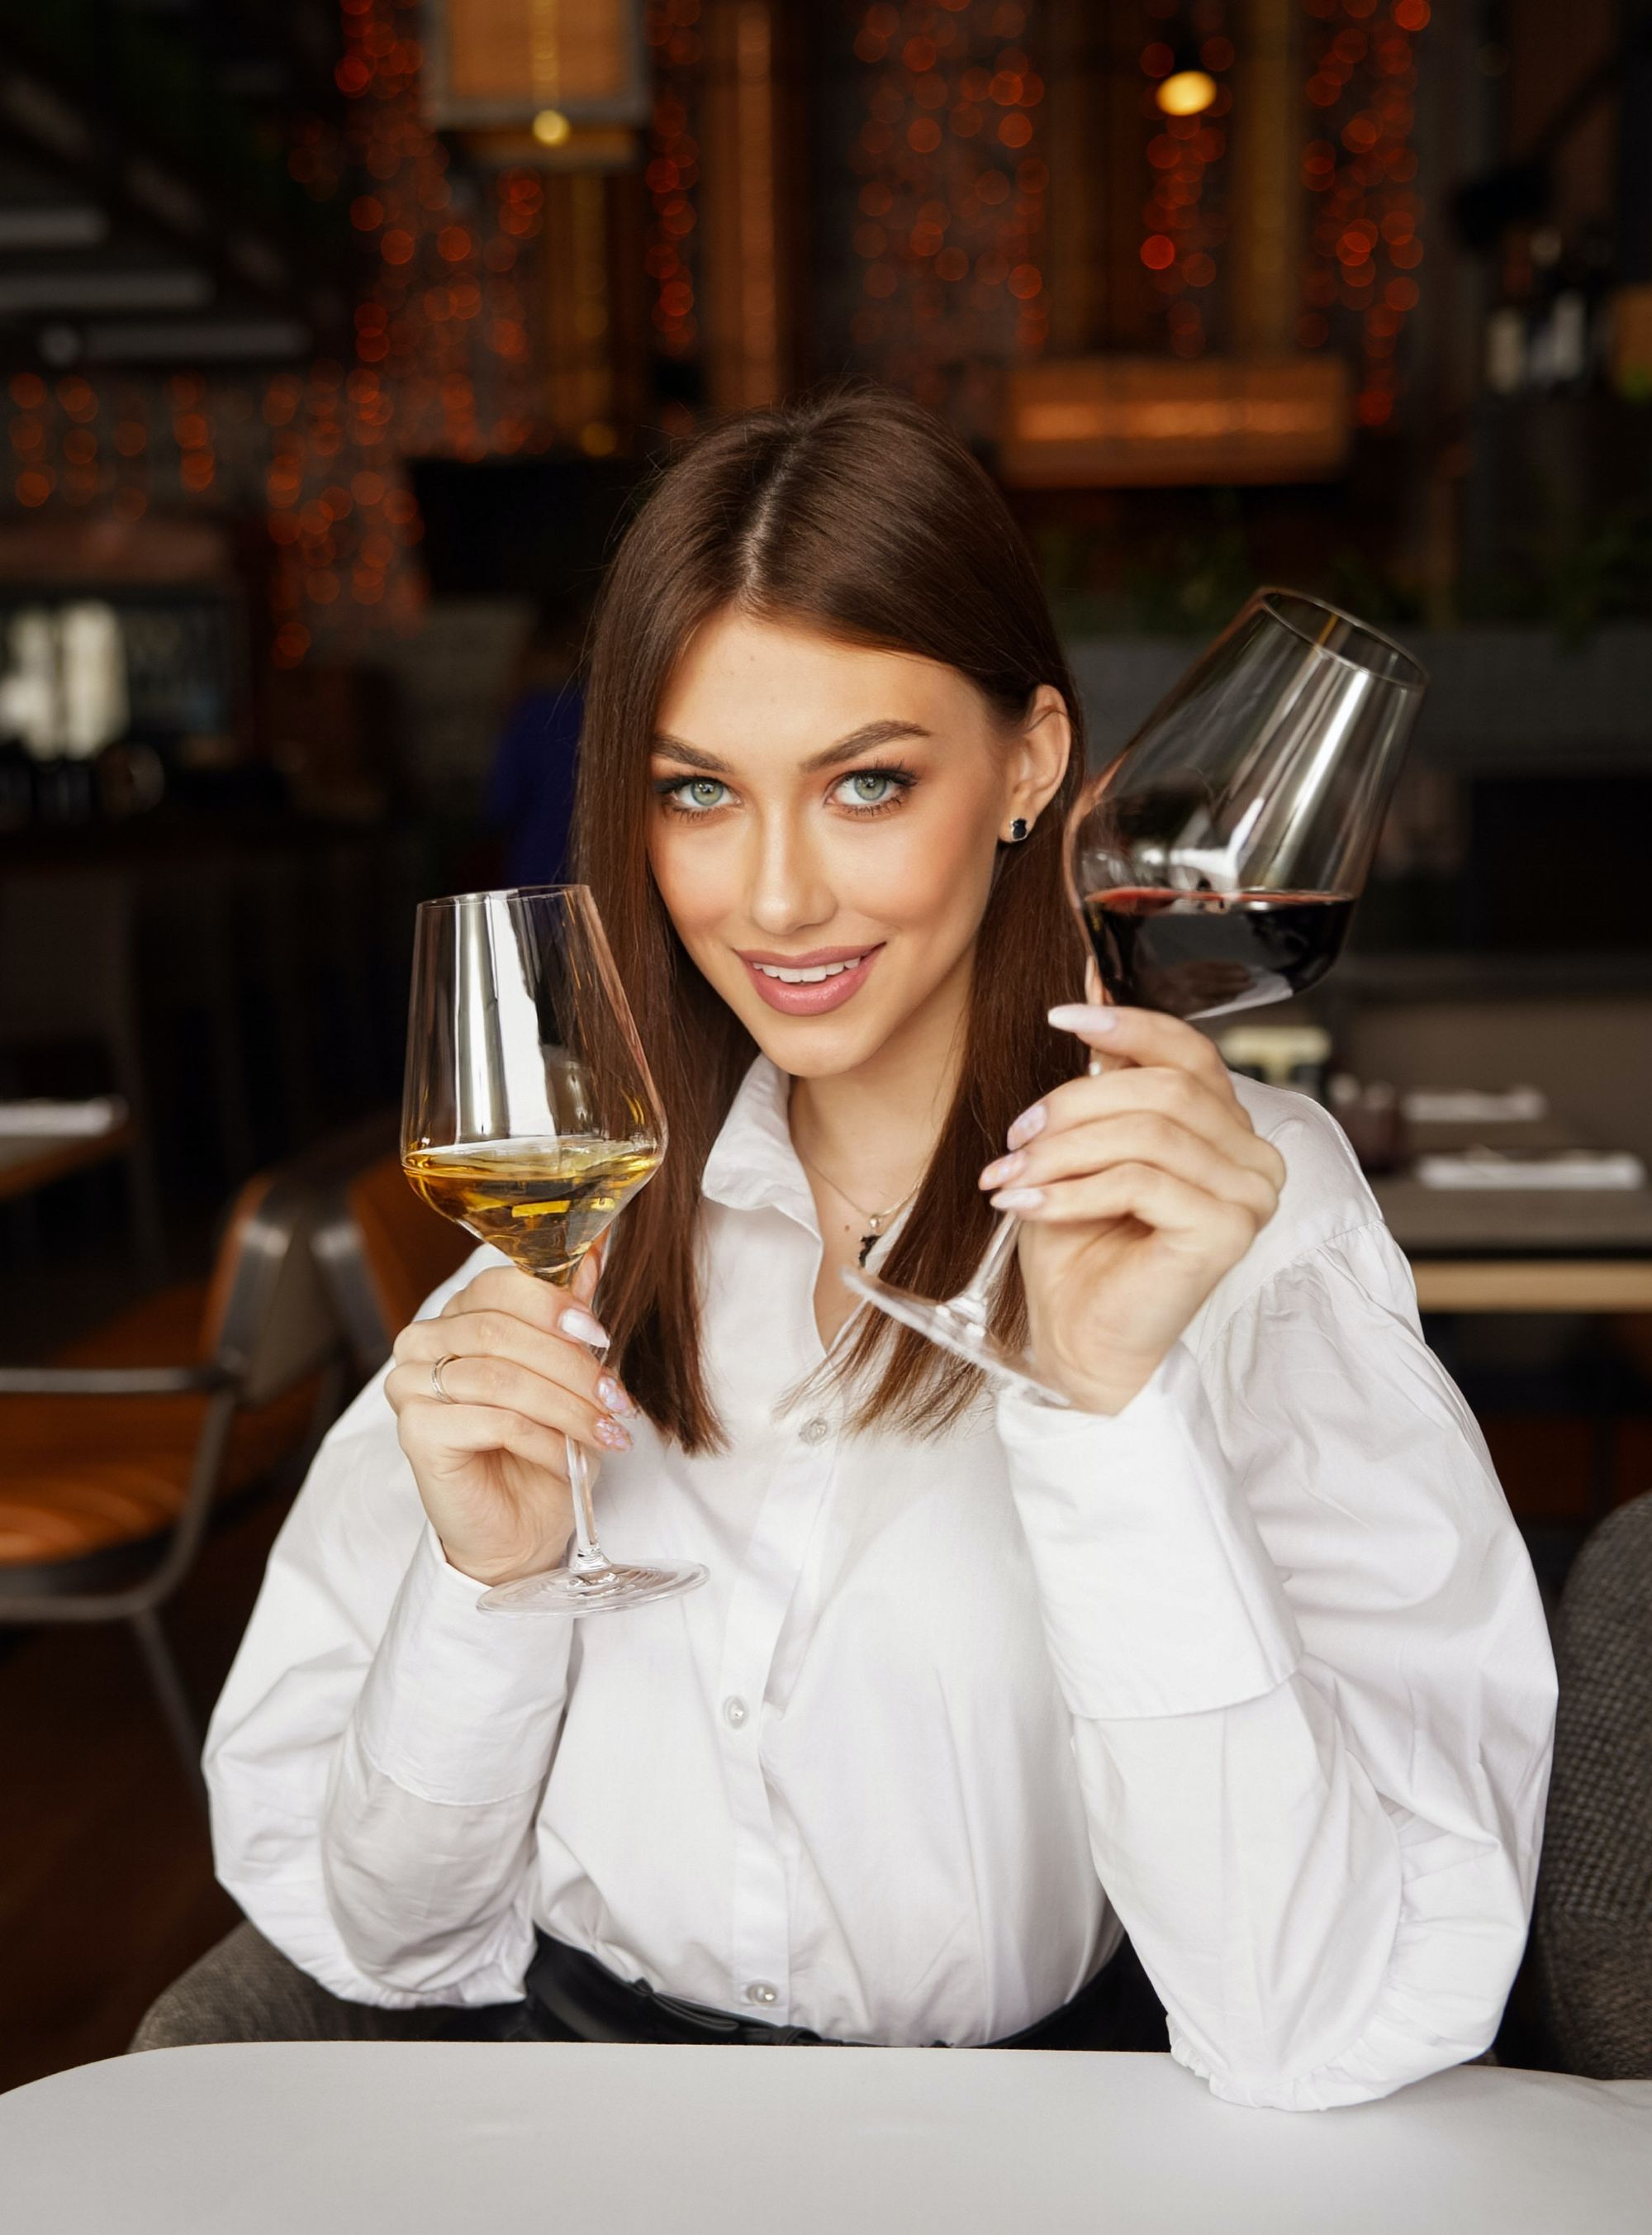 A person holding a bottle of red wine and a glass of white wine